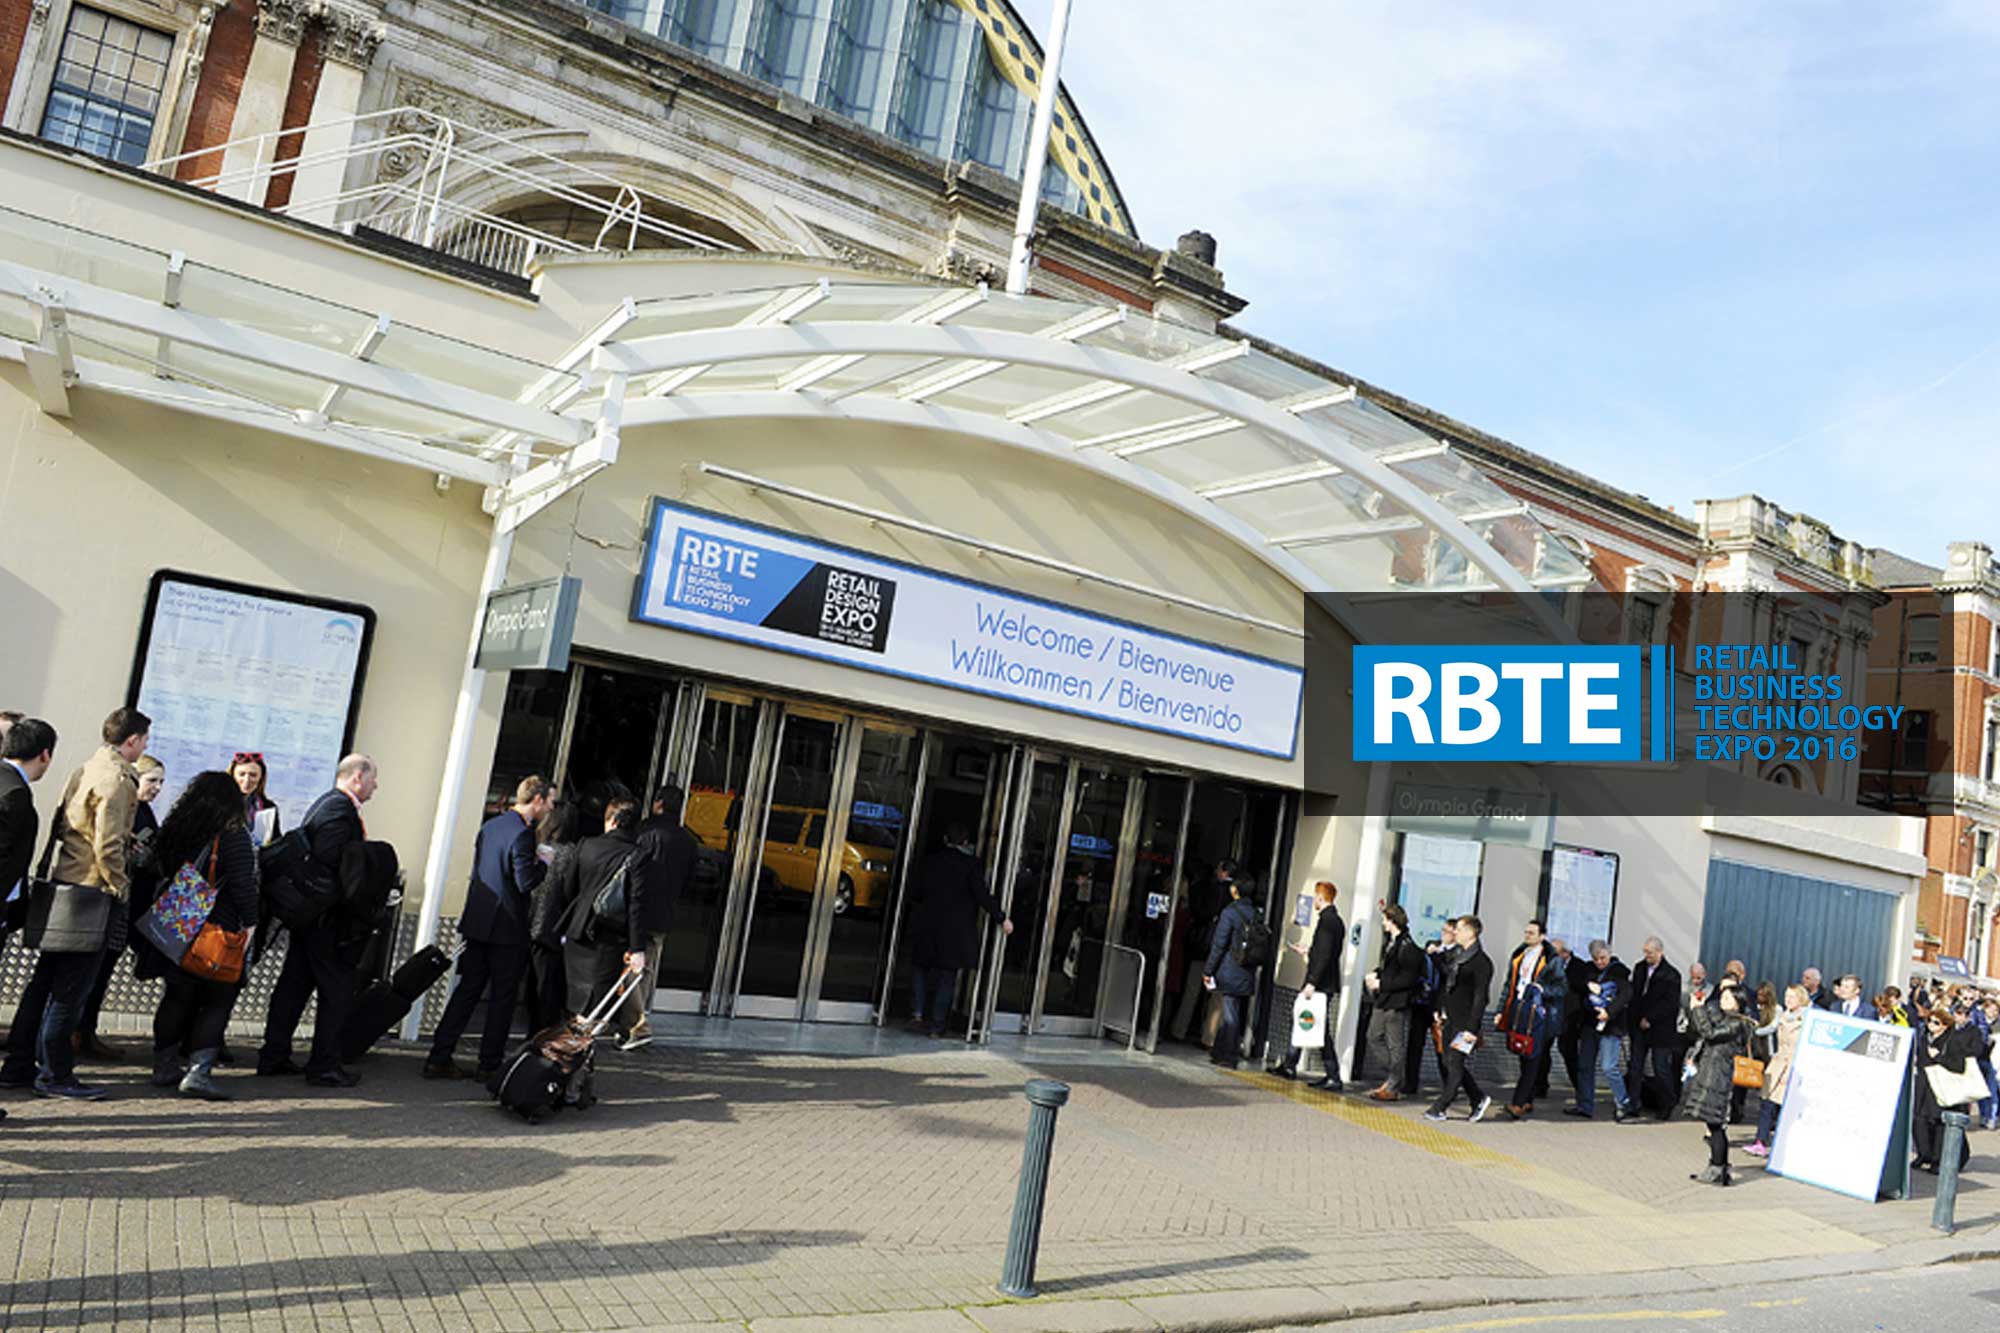 MobiWeb at RBTE 2016, Europe's biggest retail event